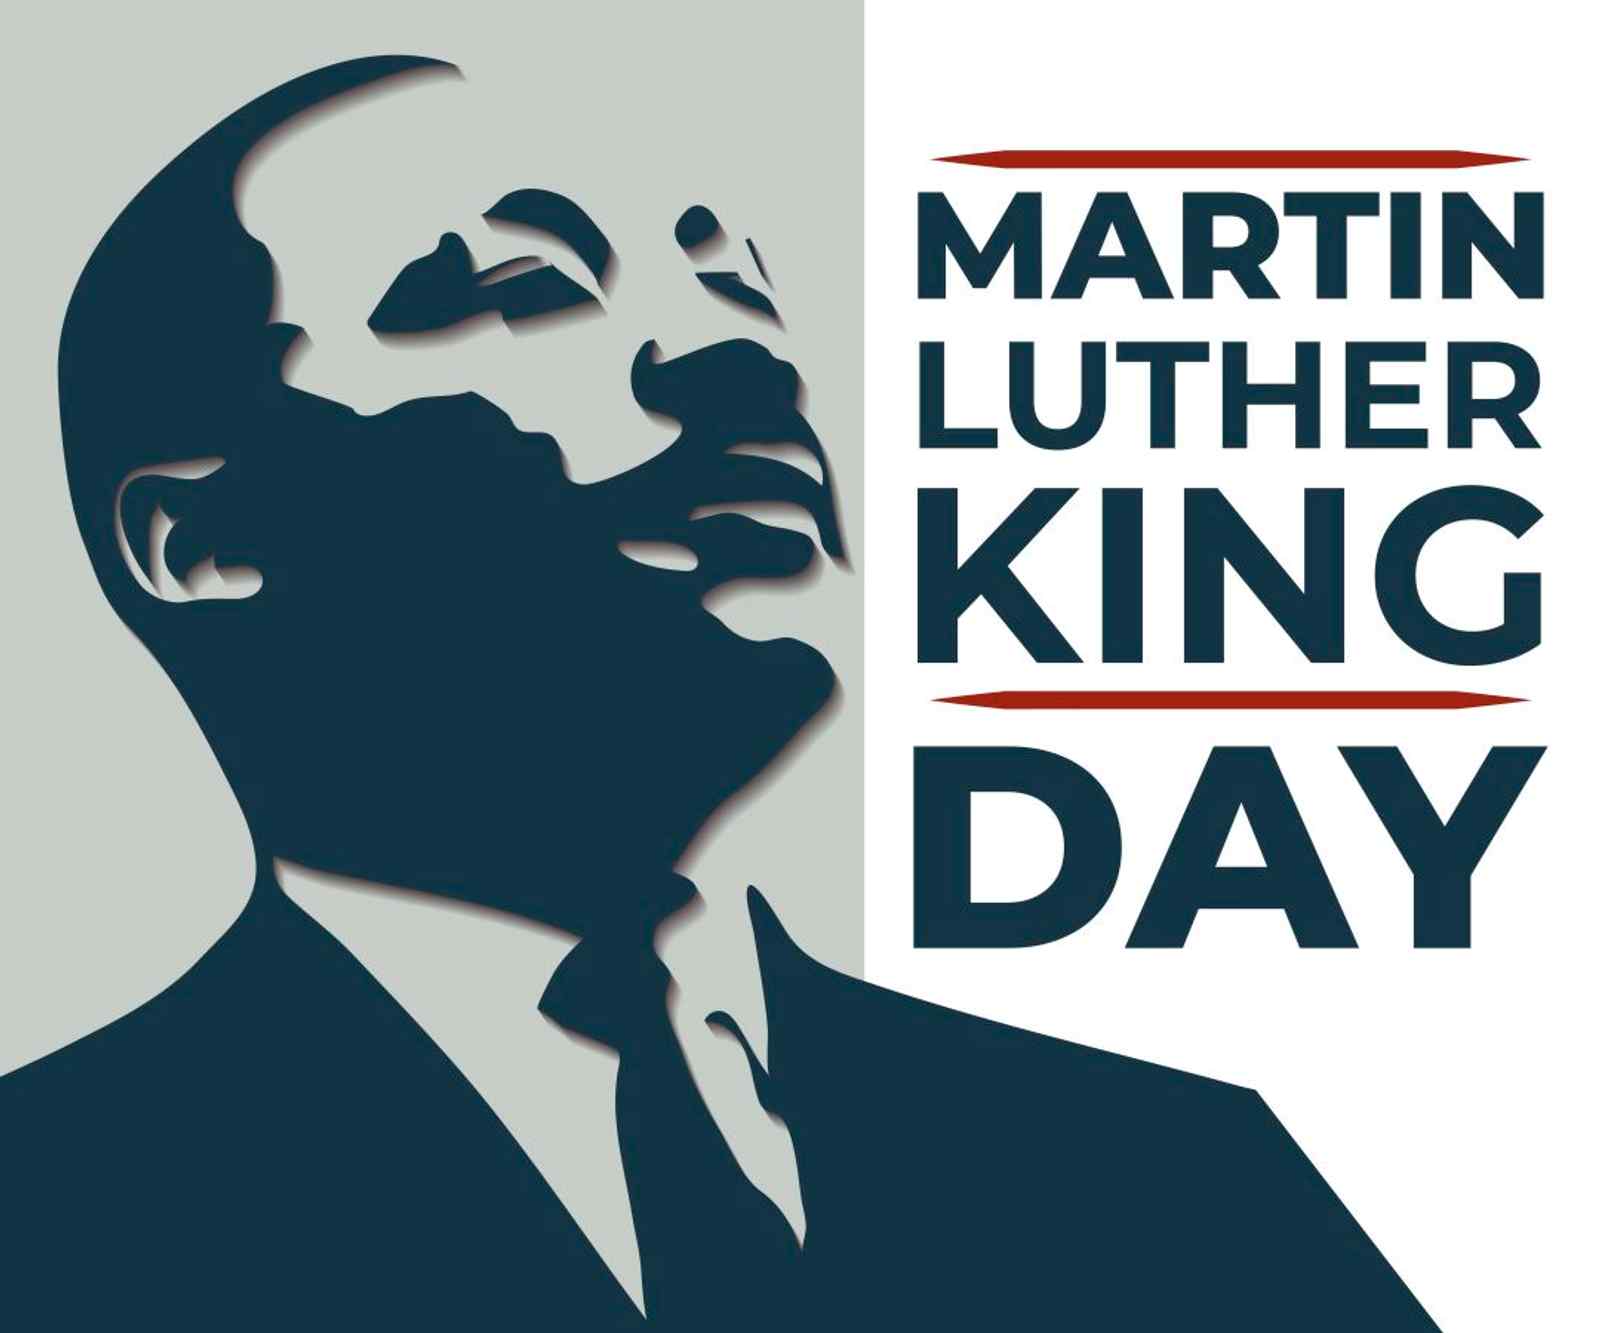 Closed for MLK, Jr Day